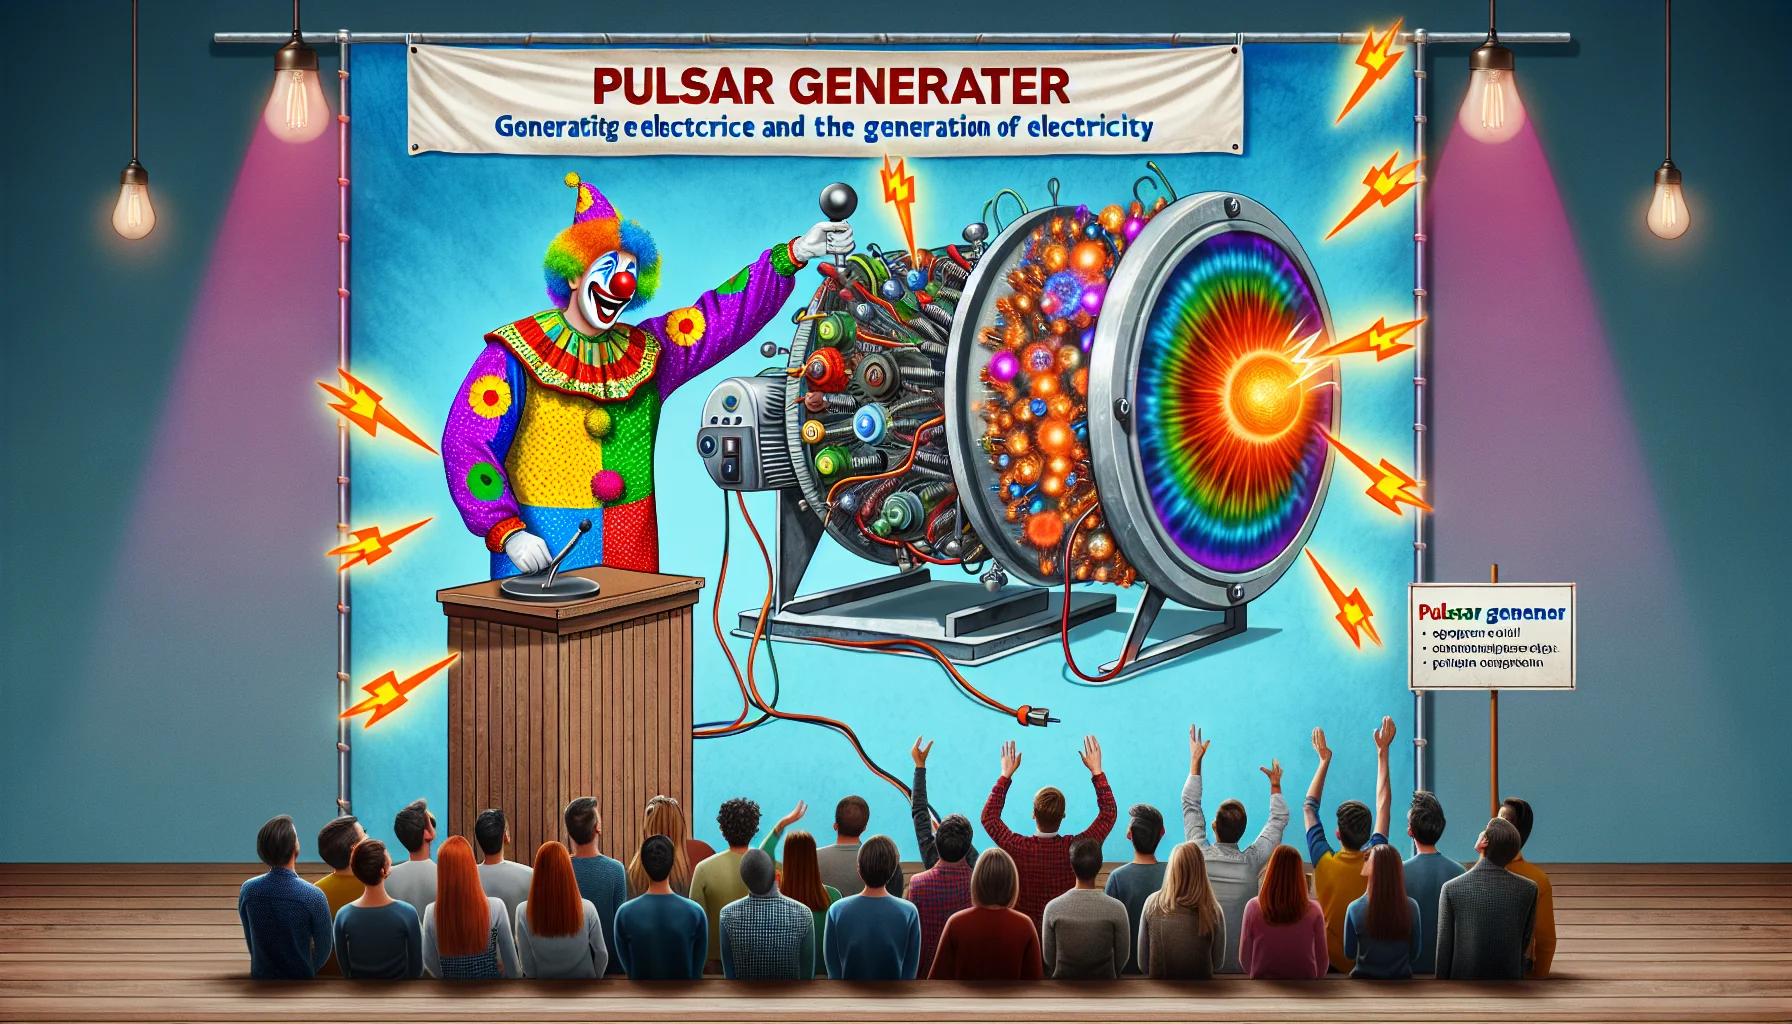 Create a humorous image displaying Pulsar Generators and the generation of electricity. Set the scene in a science fair, and have a clown as one of the participants presenting their pulsar generator. The clown wears vibrant and mismatched clothing and operates the generator using a huge, oversized switch, and the electricity generated sets off an array of colorful light bulbs. The audience, made of people from a diverse range of descents and genders, reacts with surprise, joy, and applause. Include banners promoting the idea of generating electricity using Pulsar Generators.